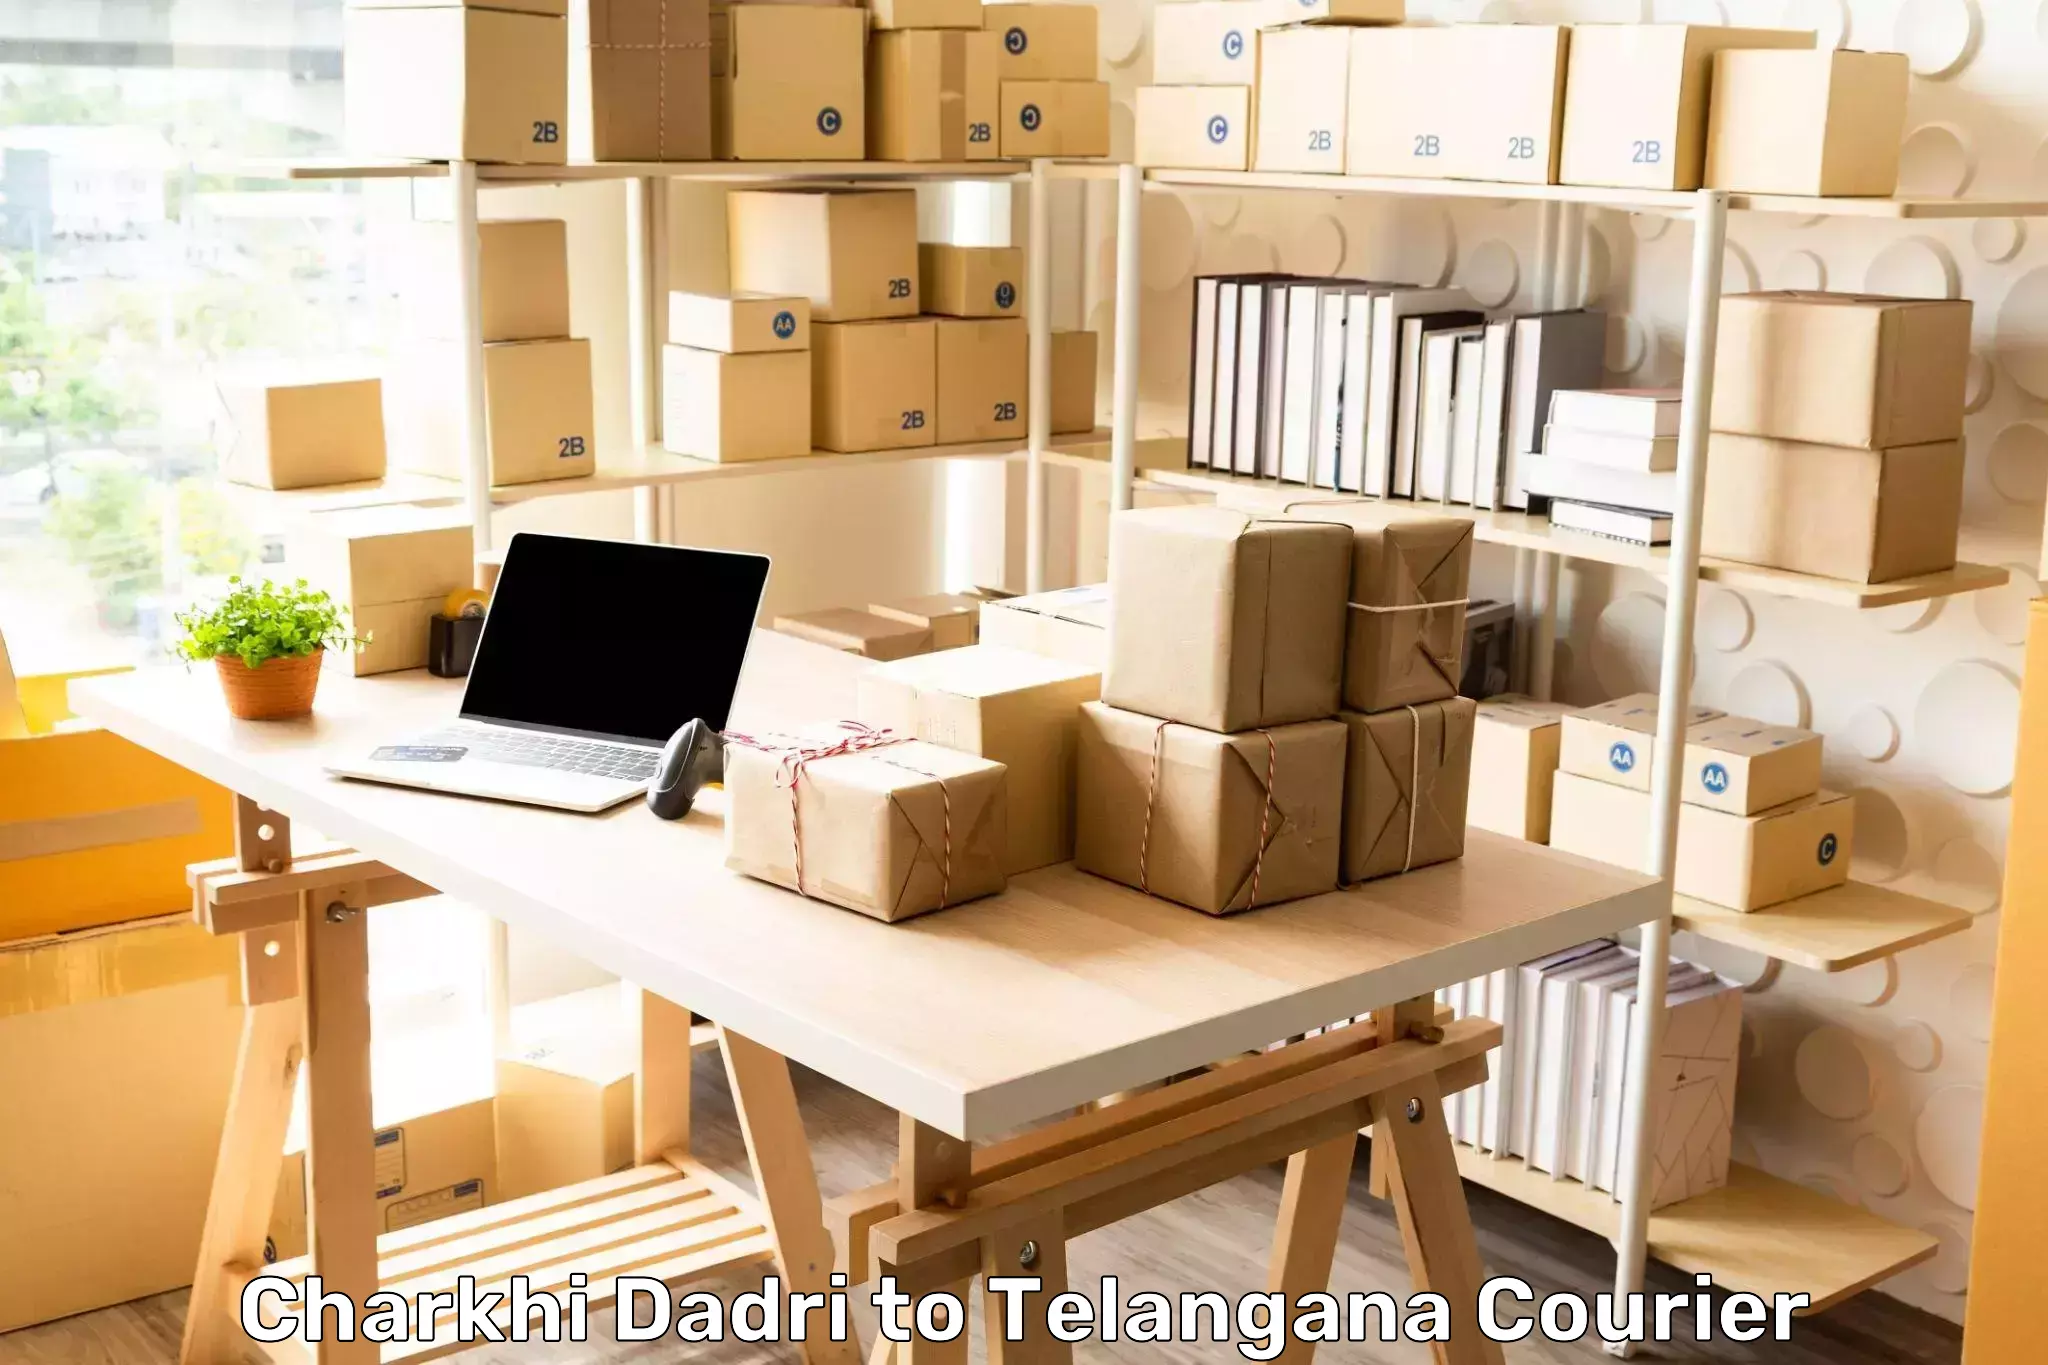 Corporate courier solutions Charkhi Dadri to Shadnagar